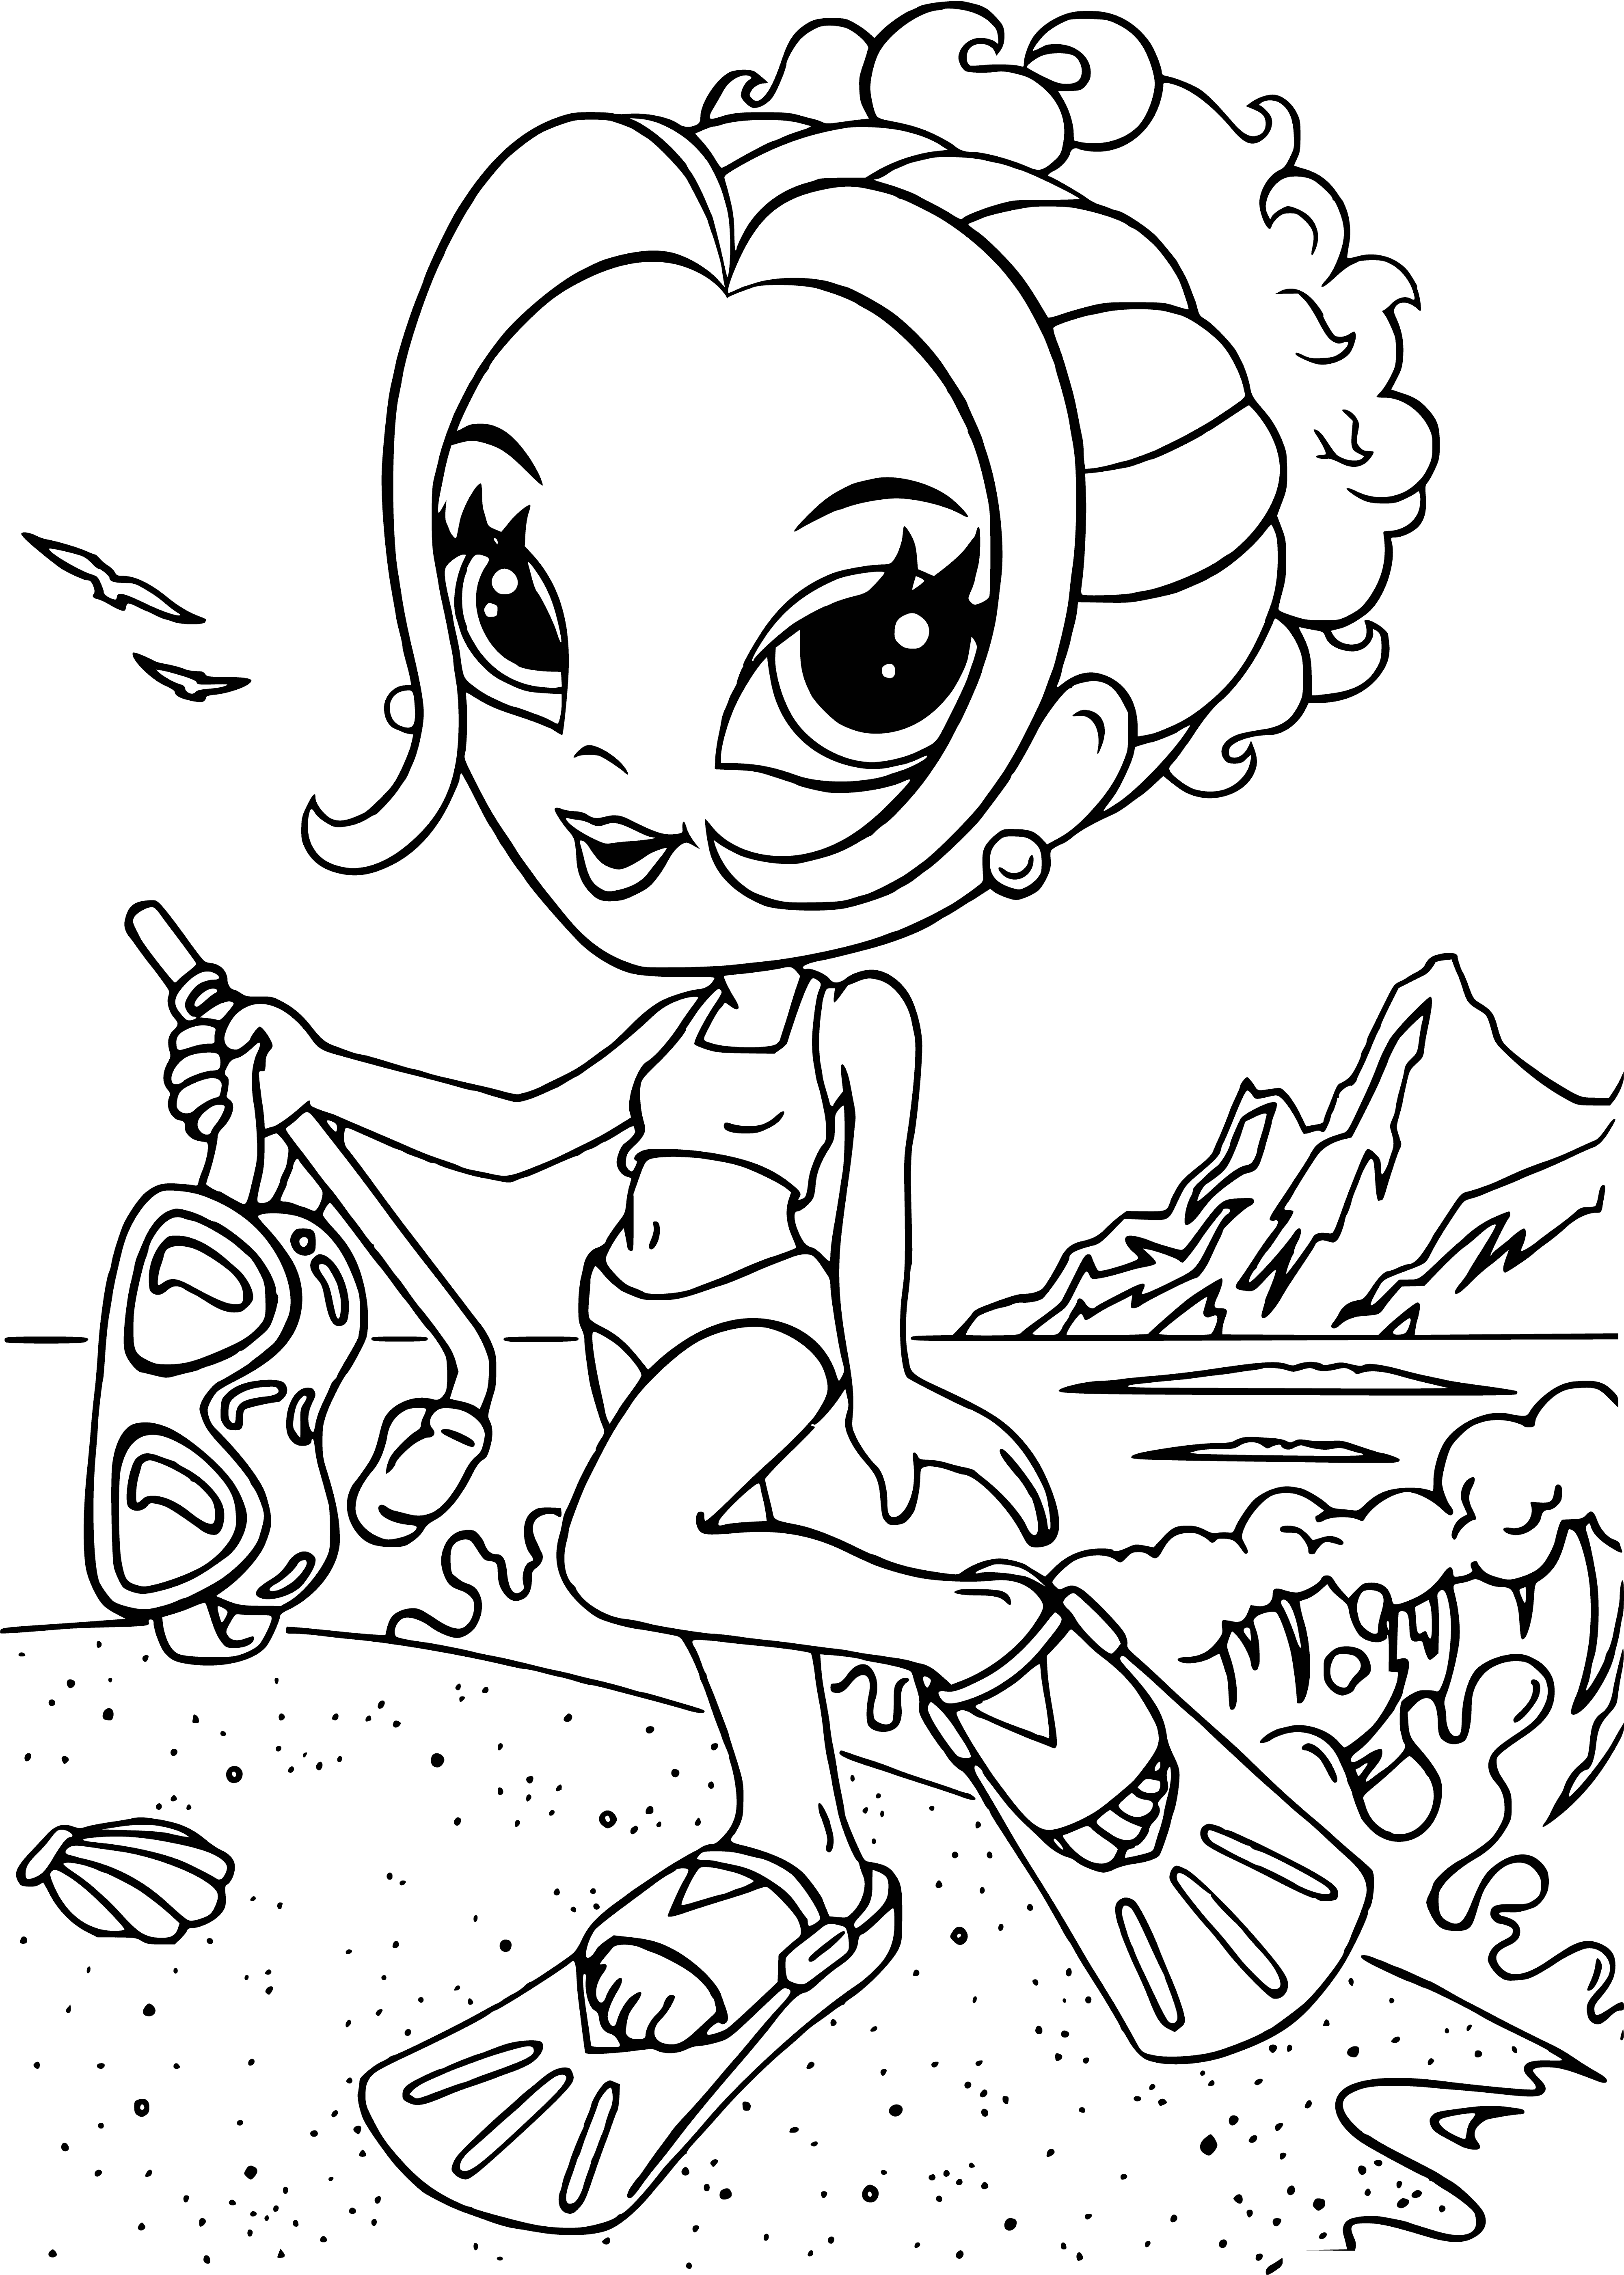 coloring page: A fashionable young woman in a pink dress, ready for a party or special event! #LisaFrank #GlamourGirl #ColoringPage